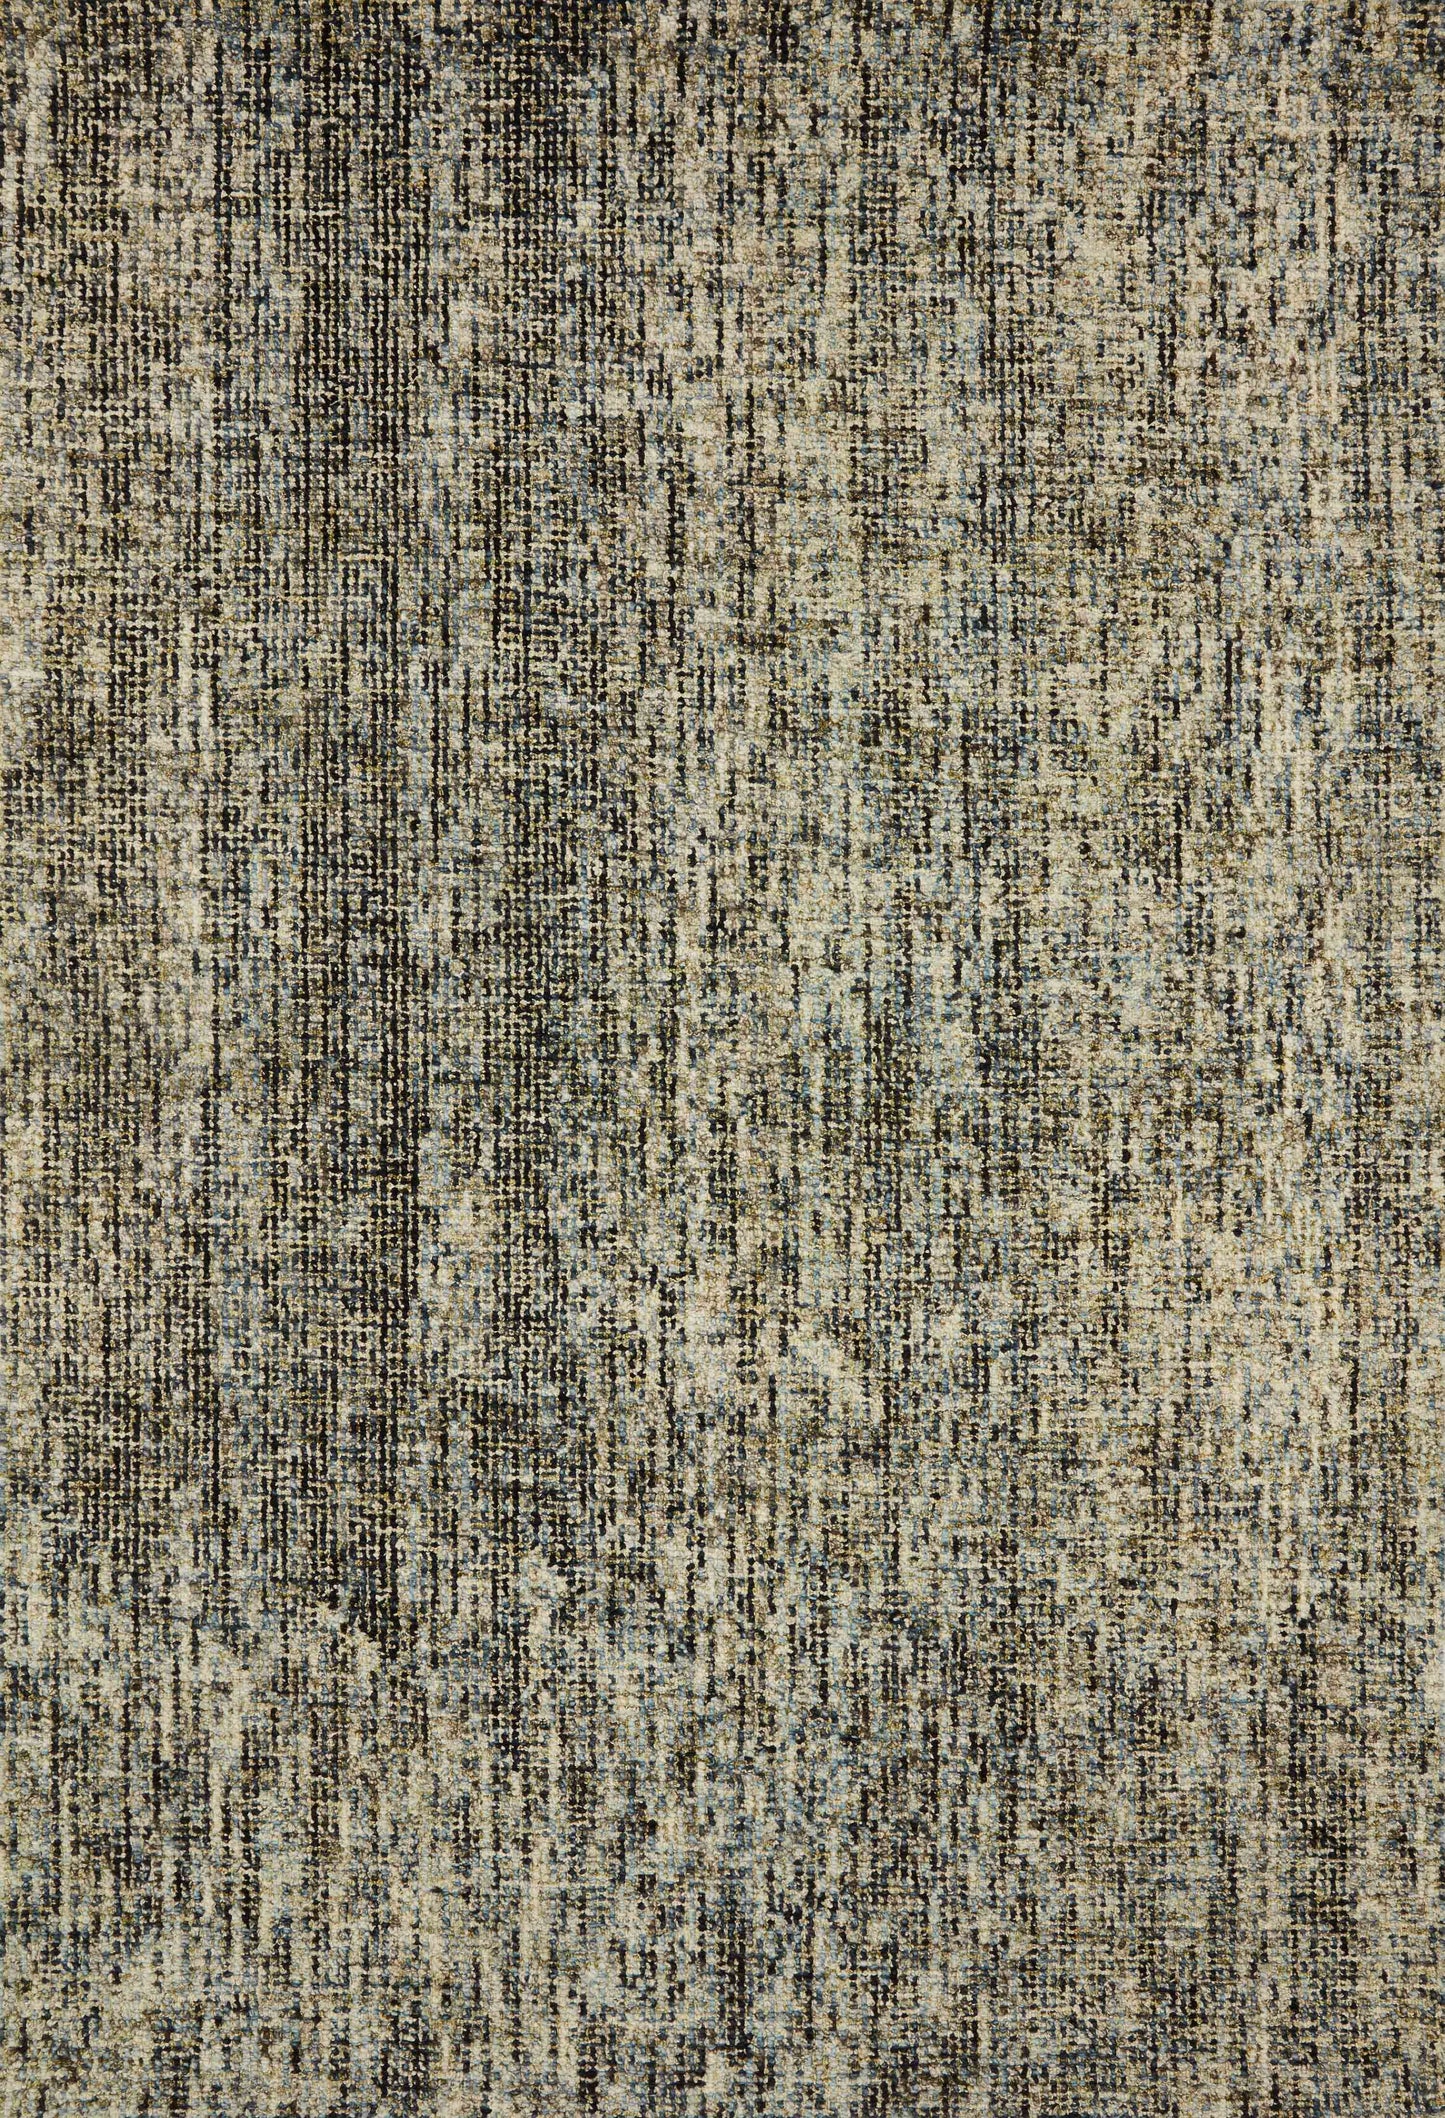 A picture of Loloi's Harlow rug, in style HLO-01, color Olive / Denim